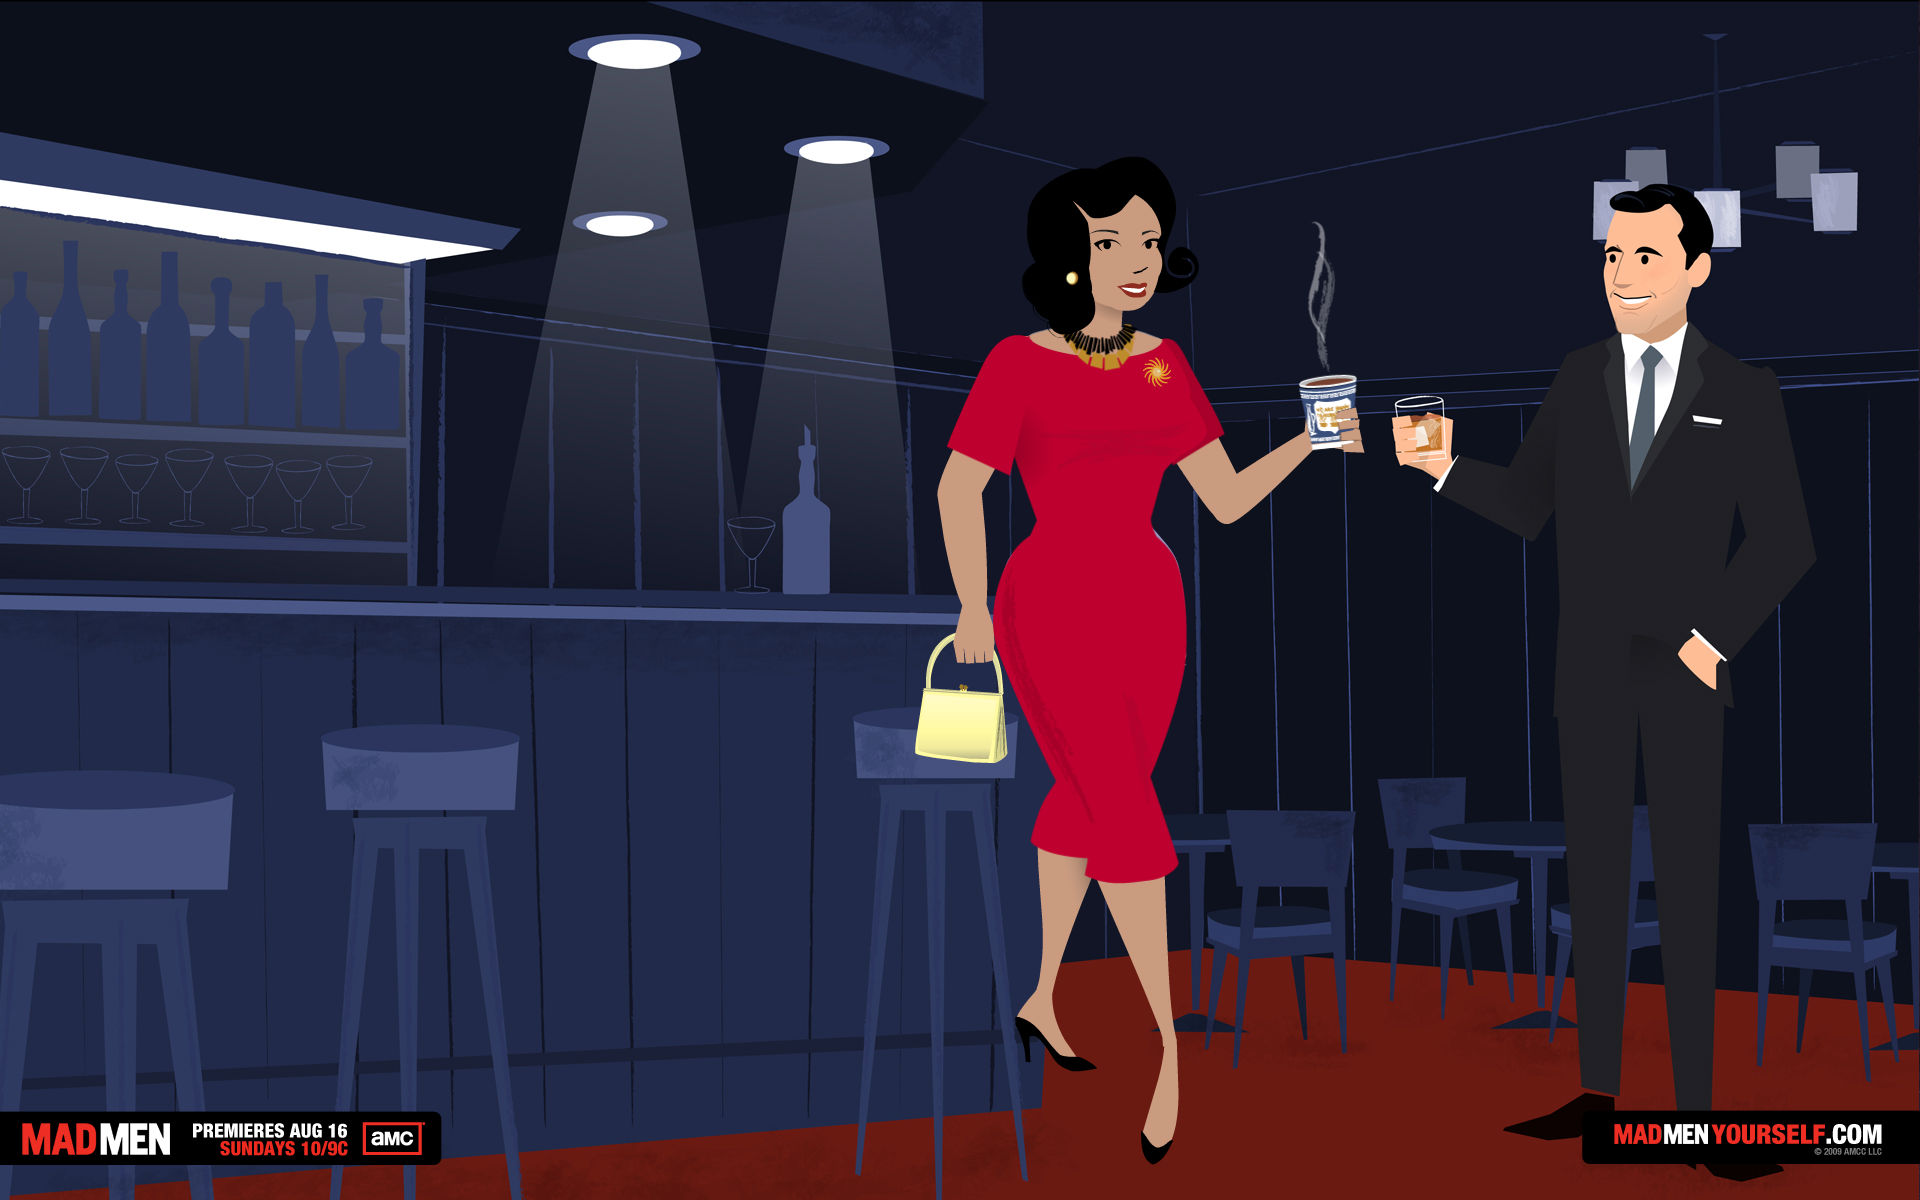 Mad Men Yourself , HD Wallpaper & Backgrounds